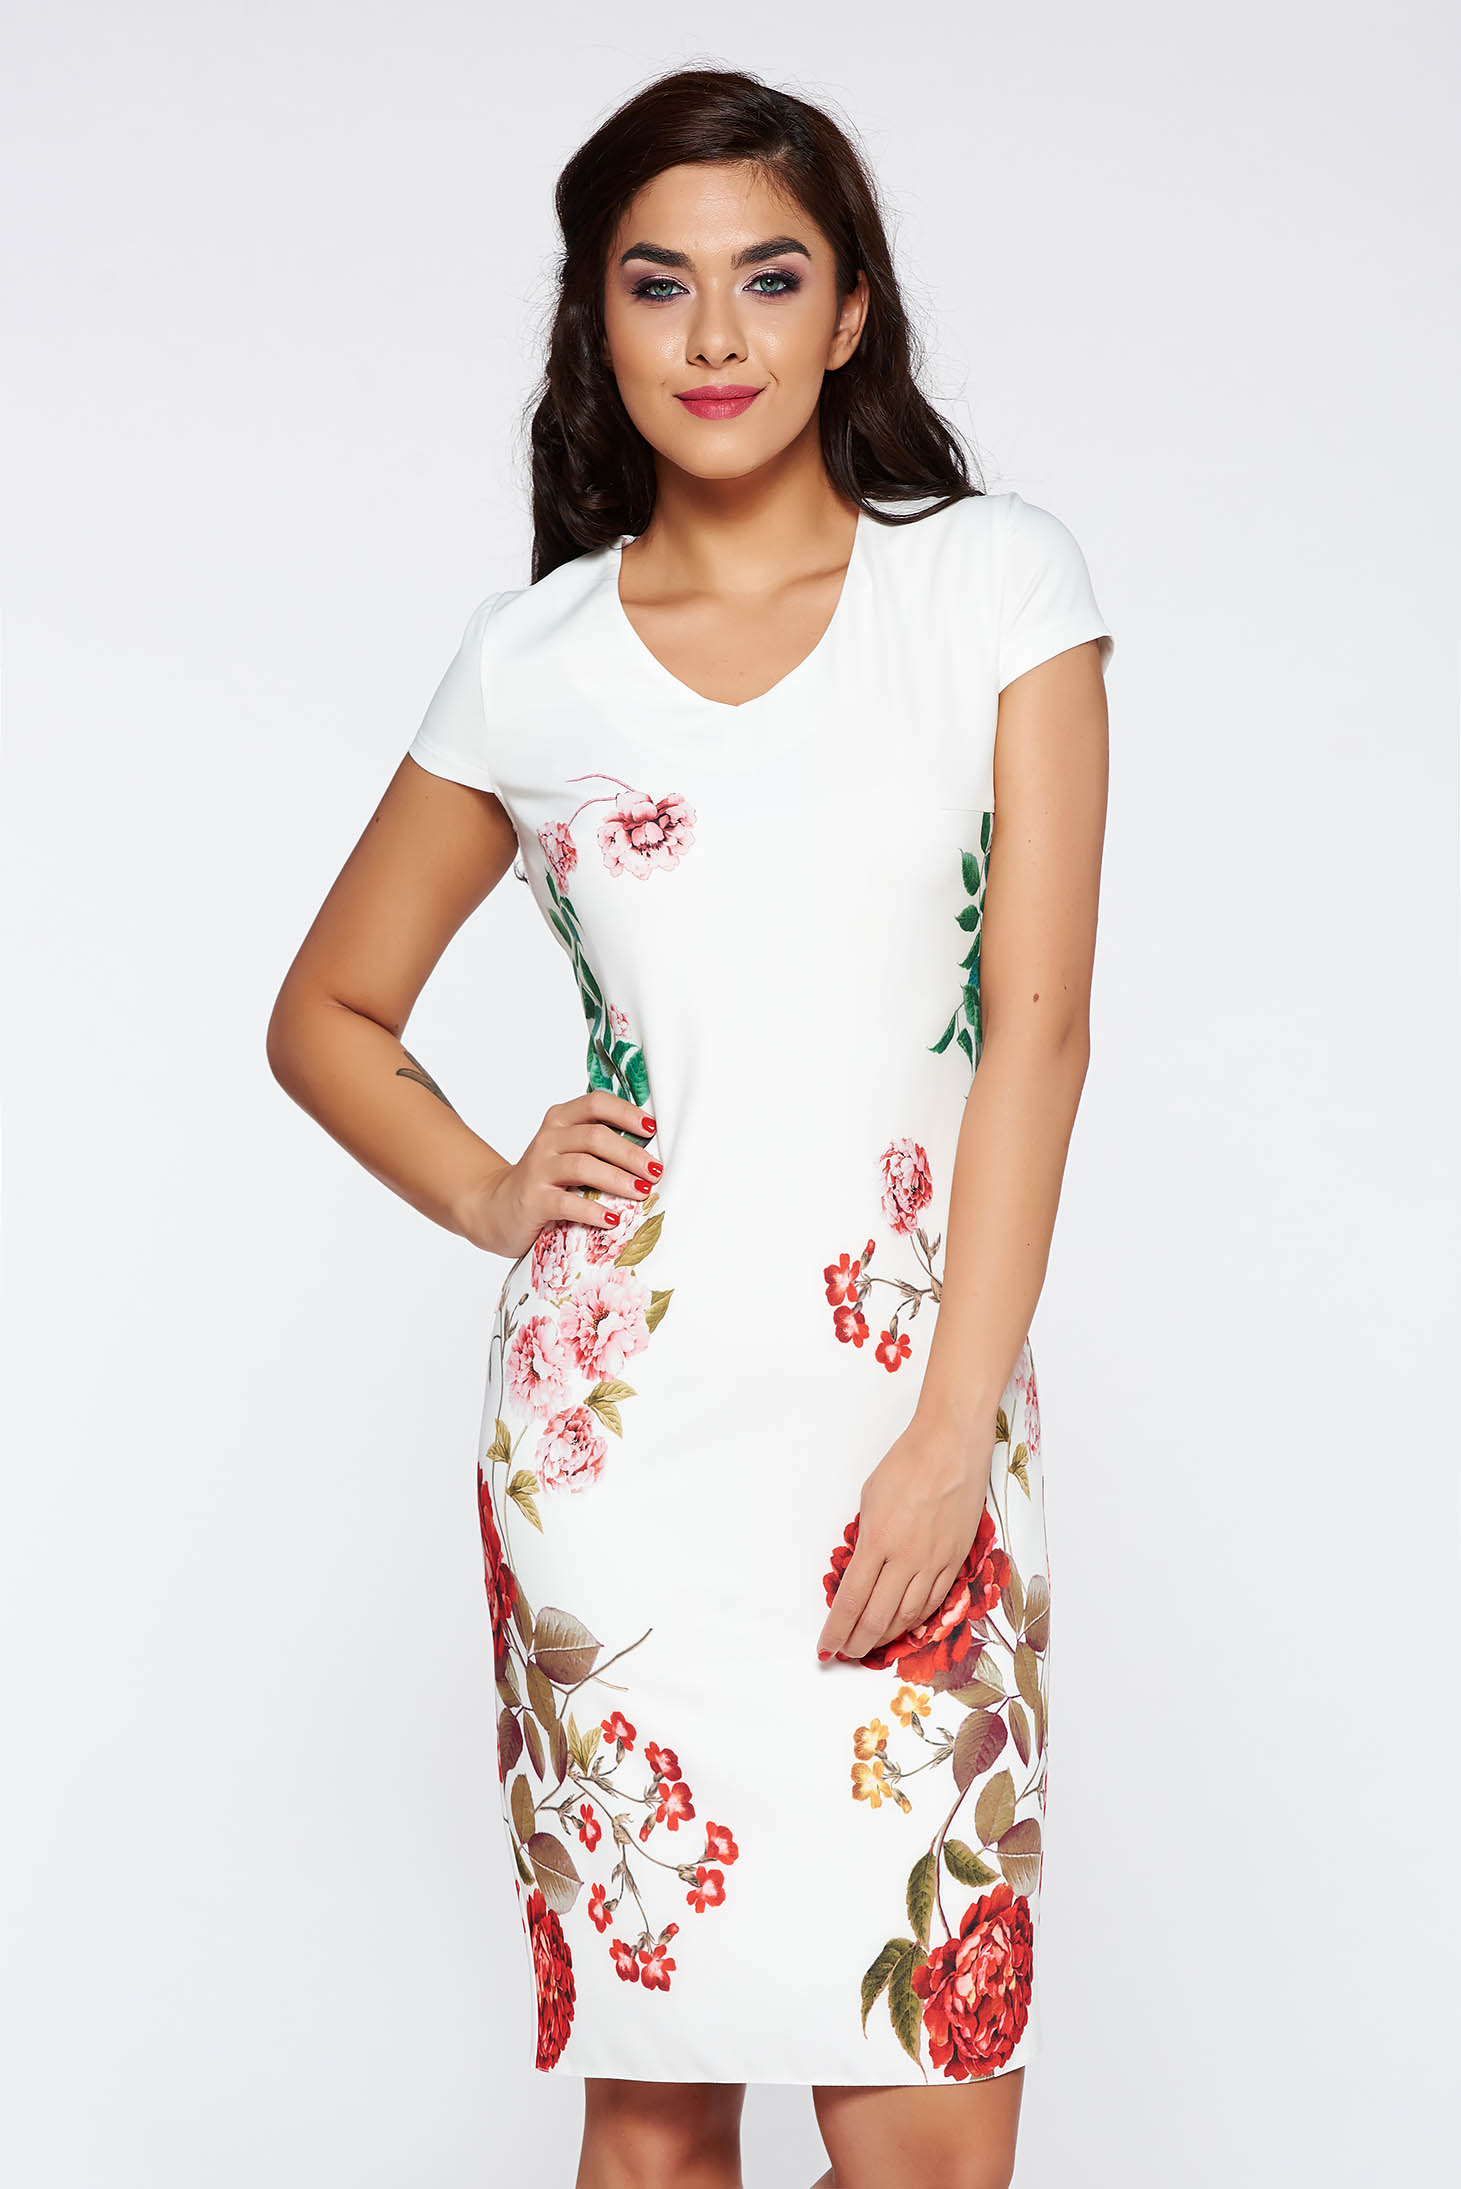 White elegant dress short sleeve midi with floral print with inside lining